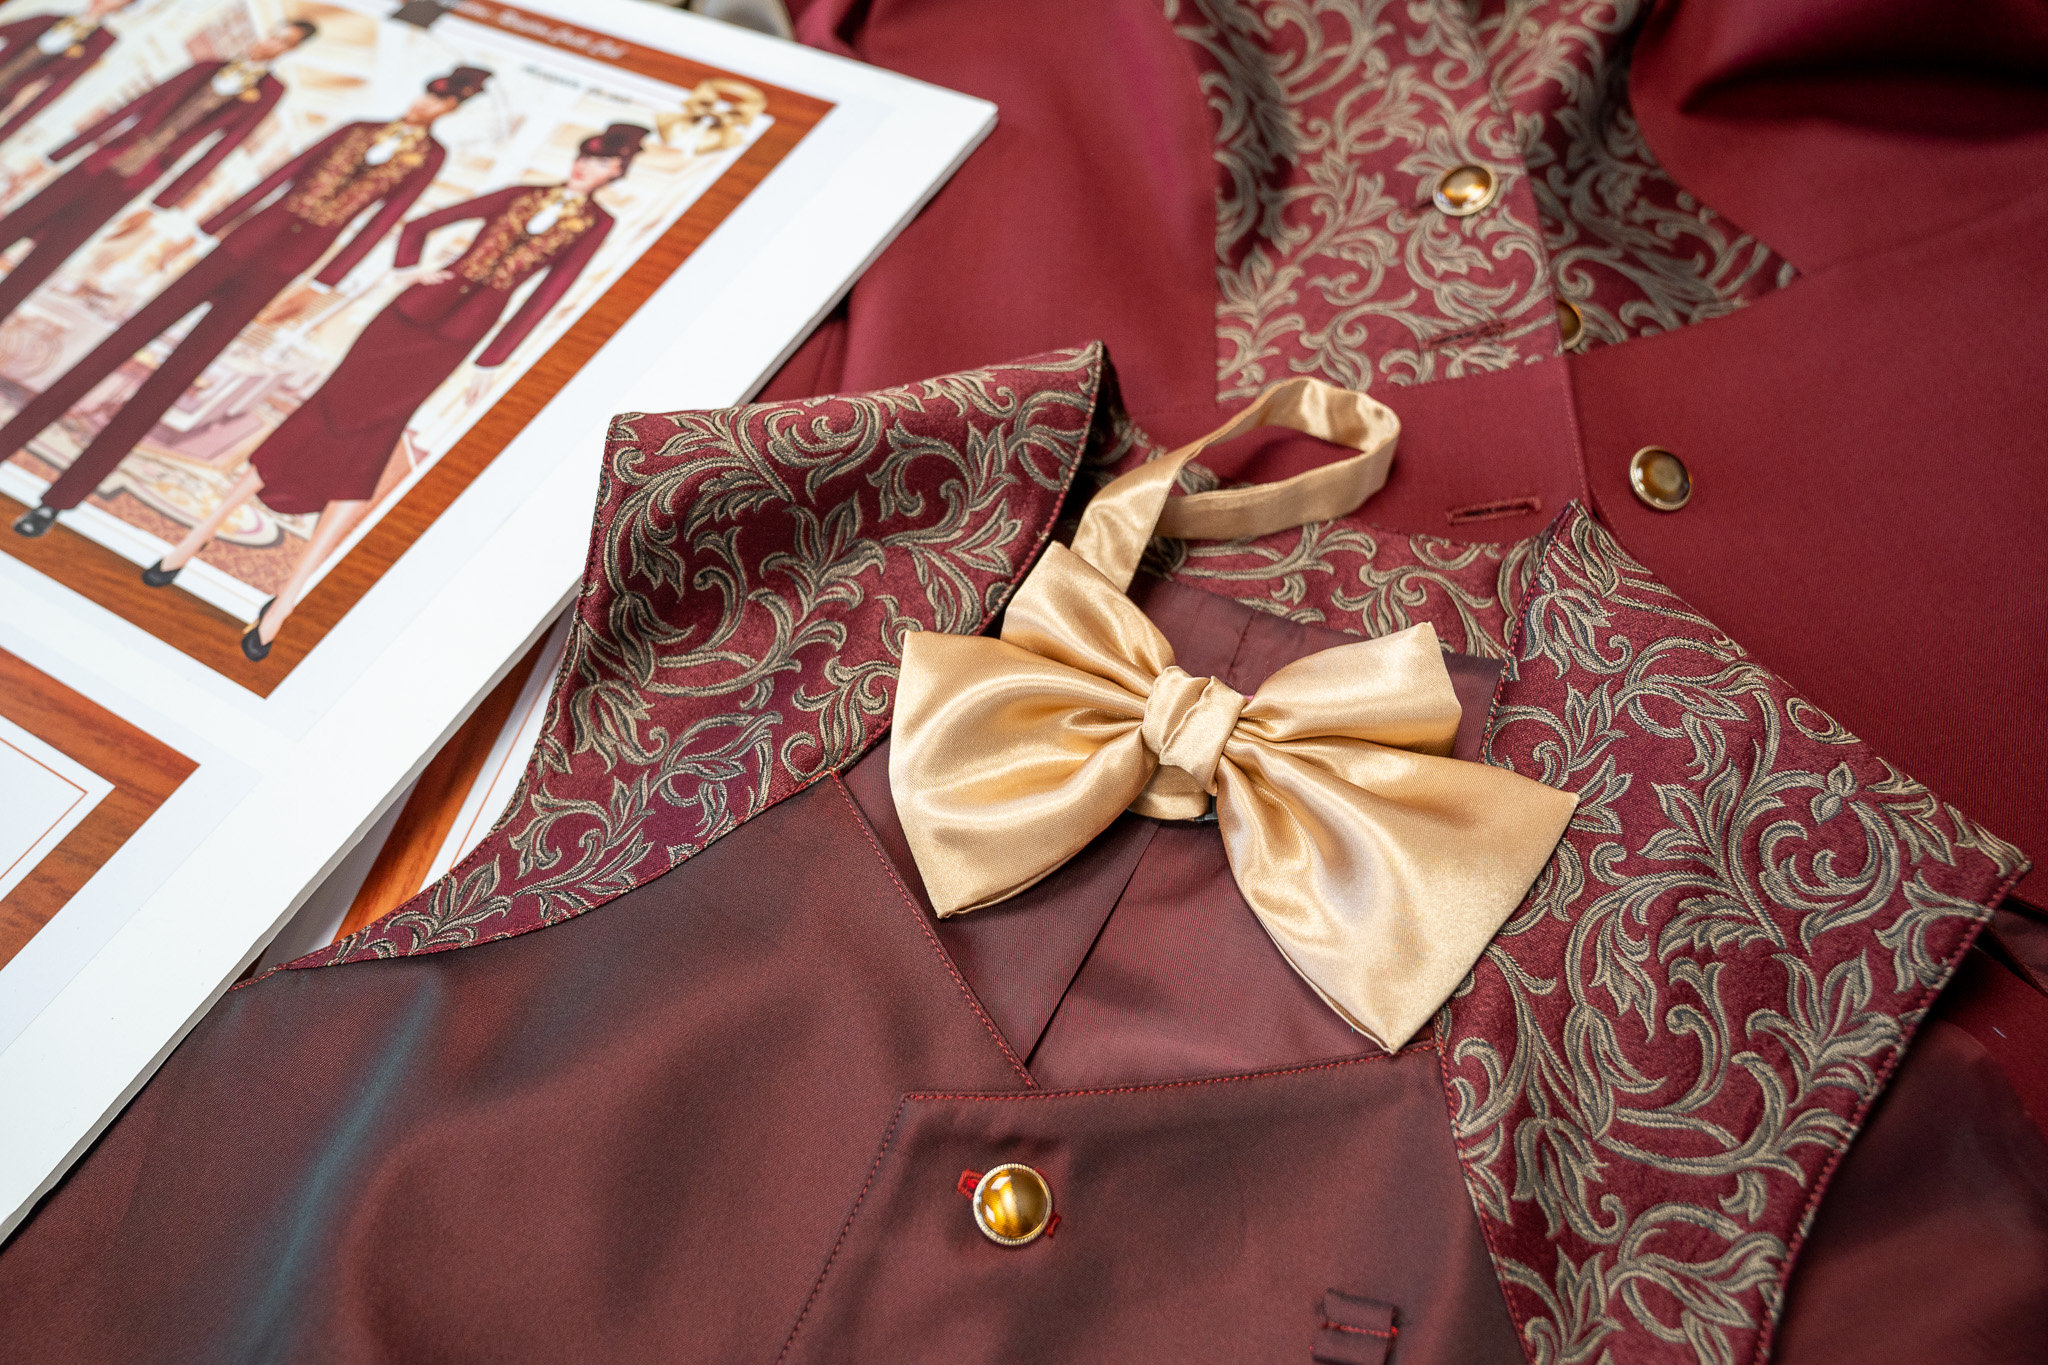 Cast Members costumes at Disneyland Hotel: celebrating the French savoir-faire